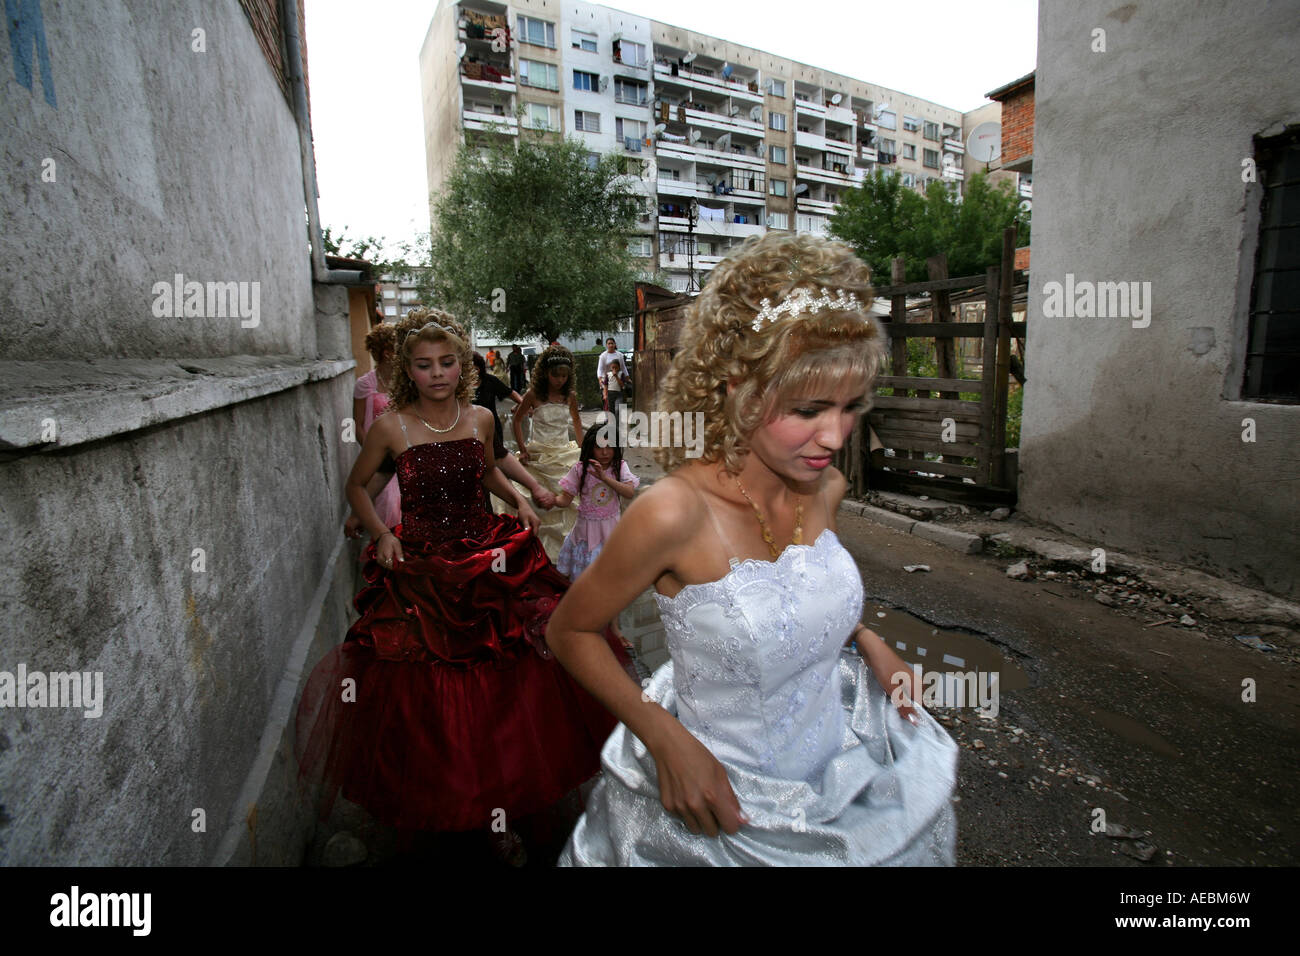 A gypsy wedding is based on music dance and lots of alcohol The bride and groom take their families into the streets and dance Stock Photo